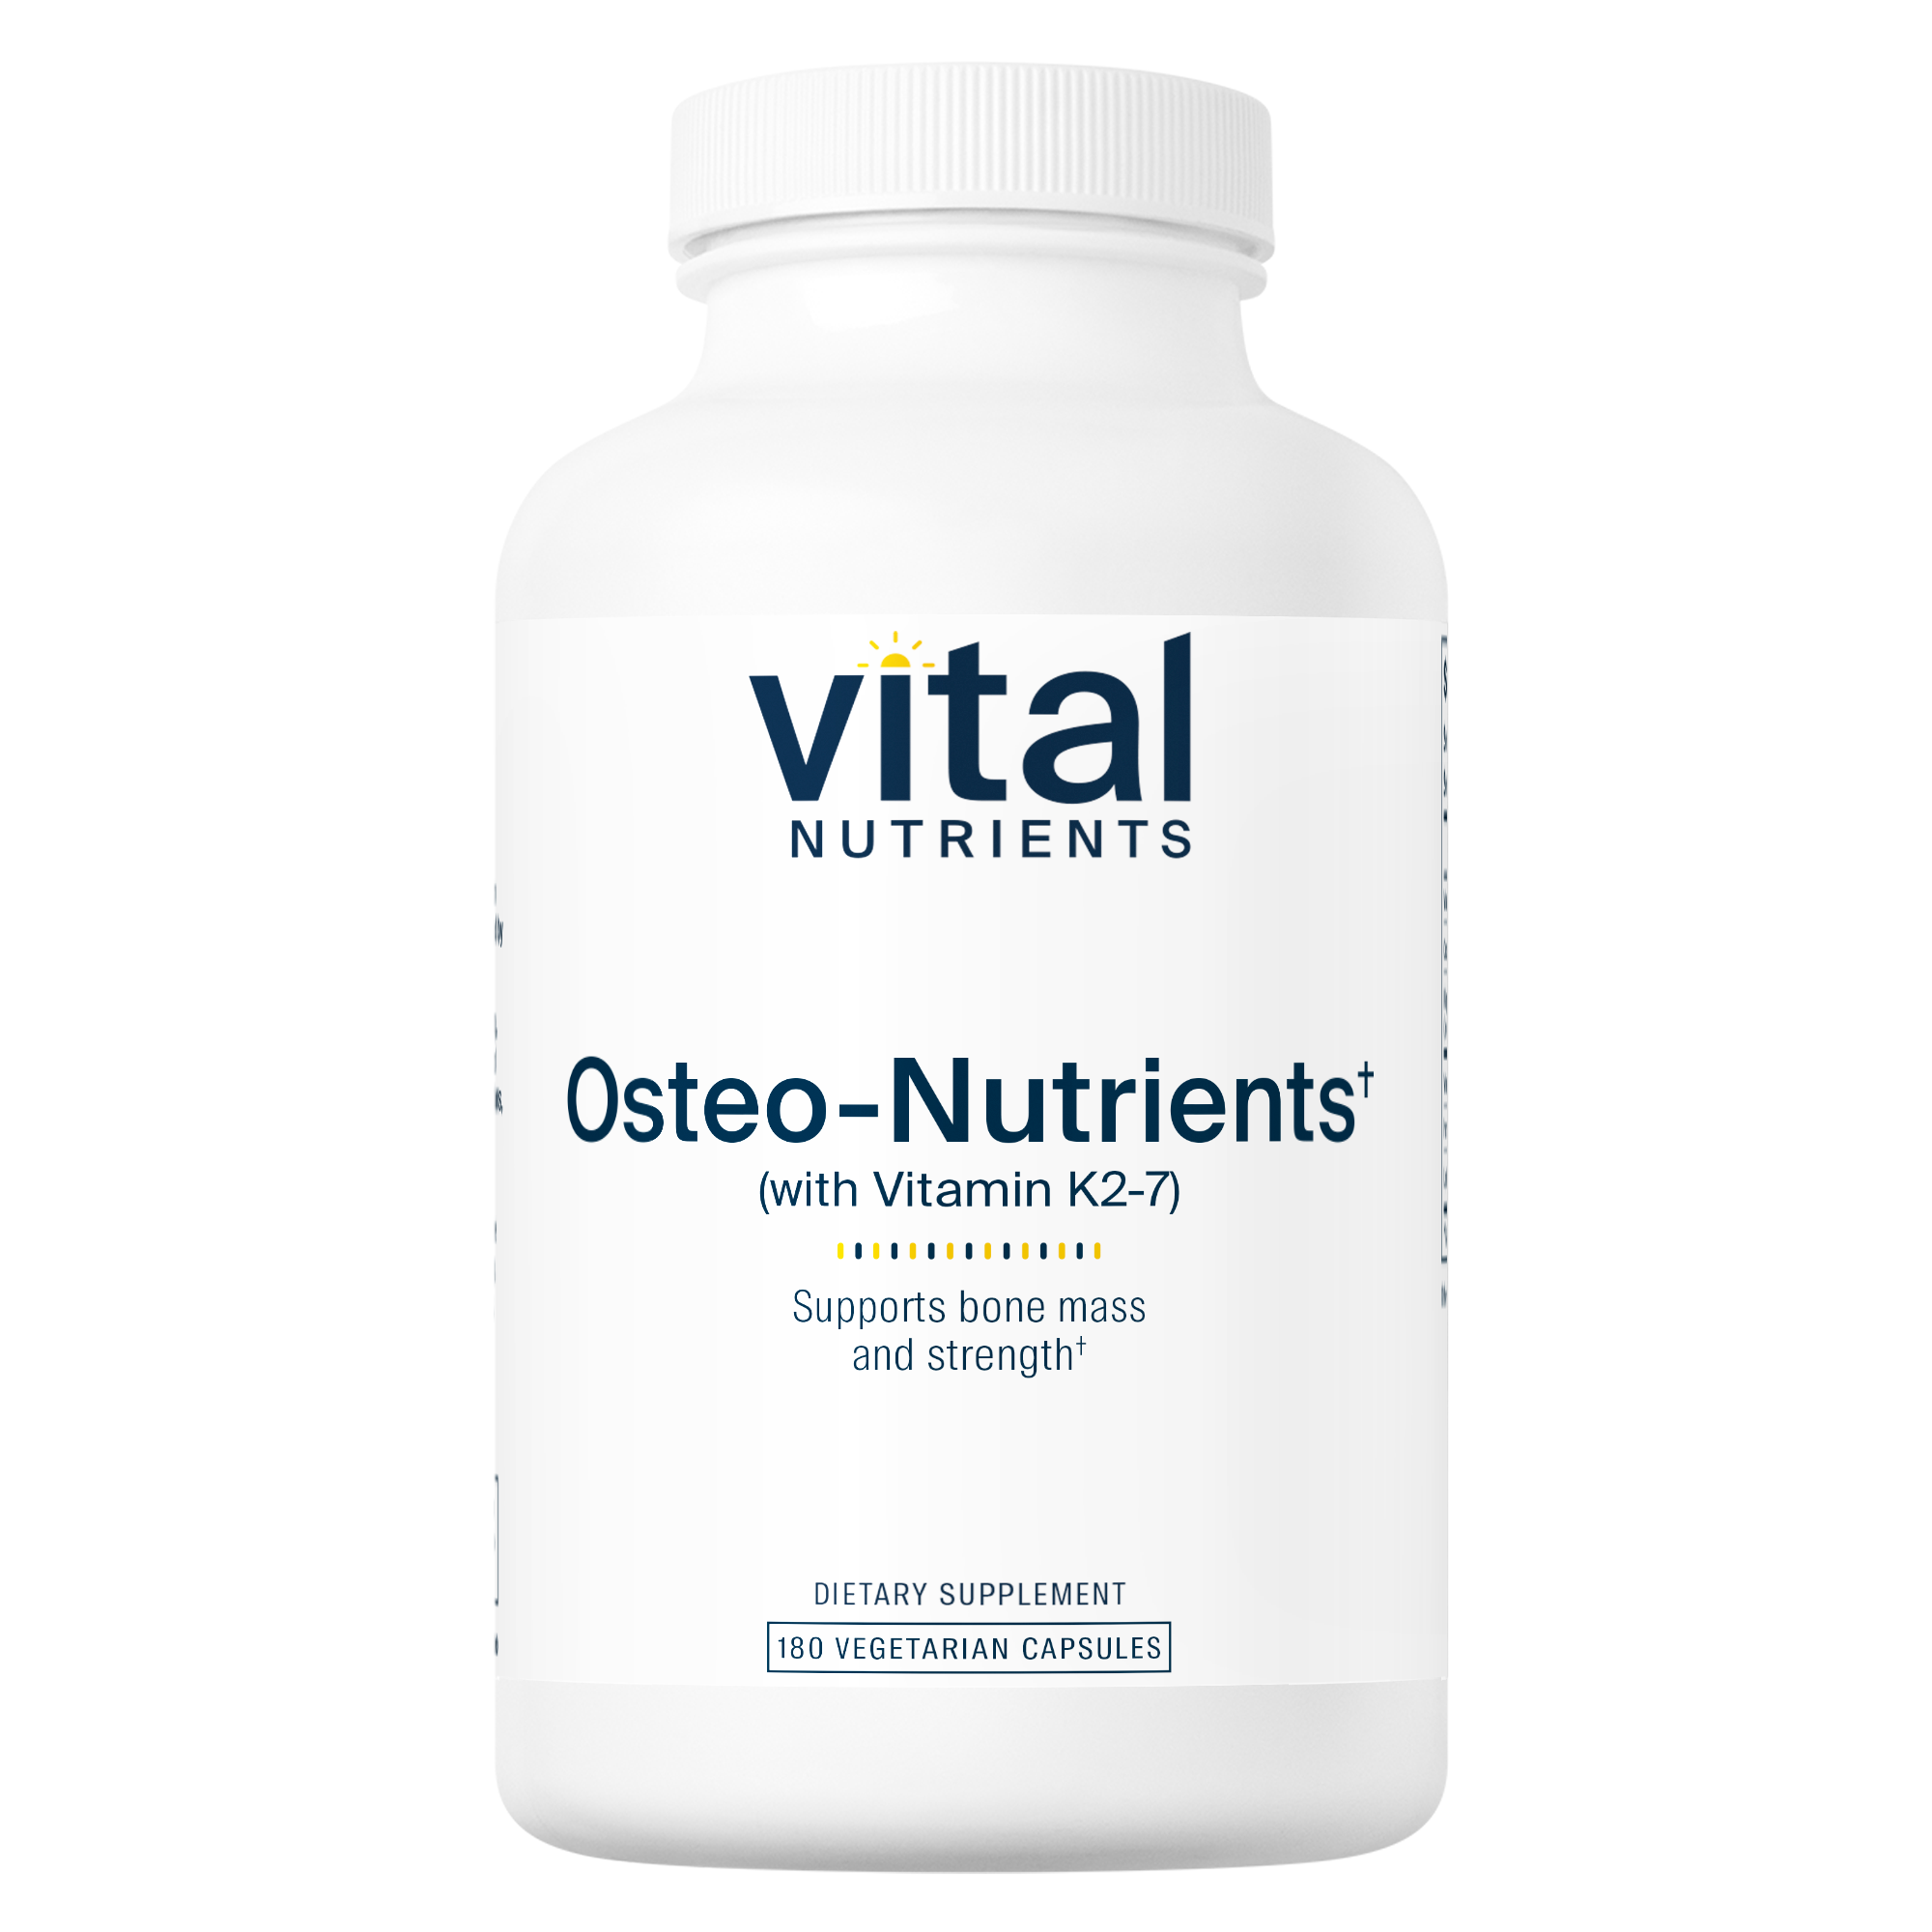 Osteo-Nutrients (with Vitamin K2-7)